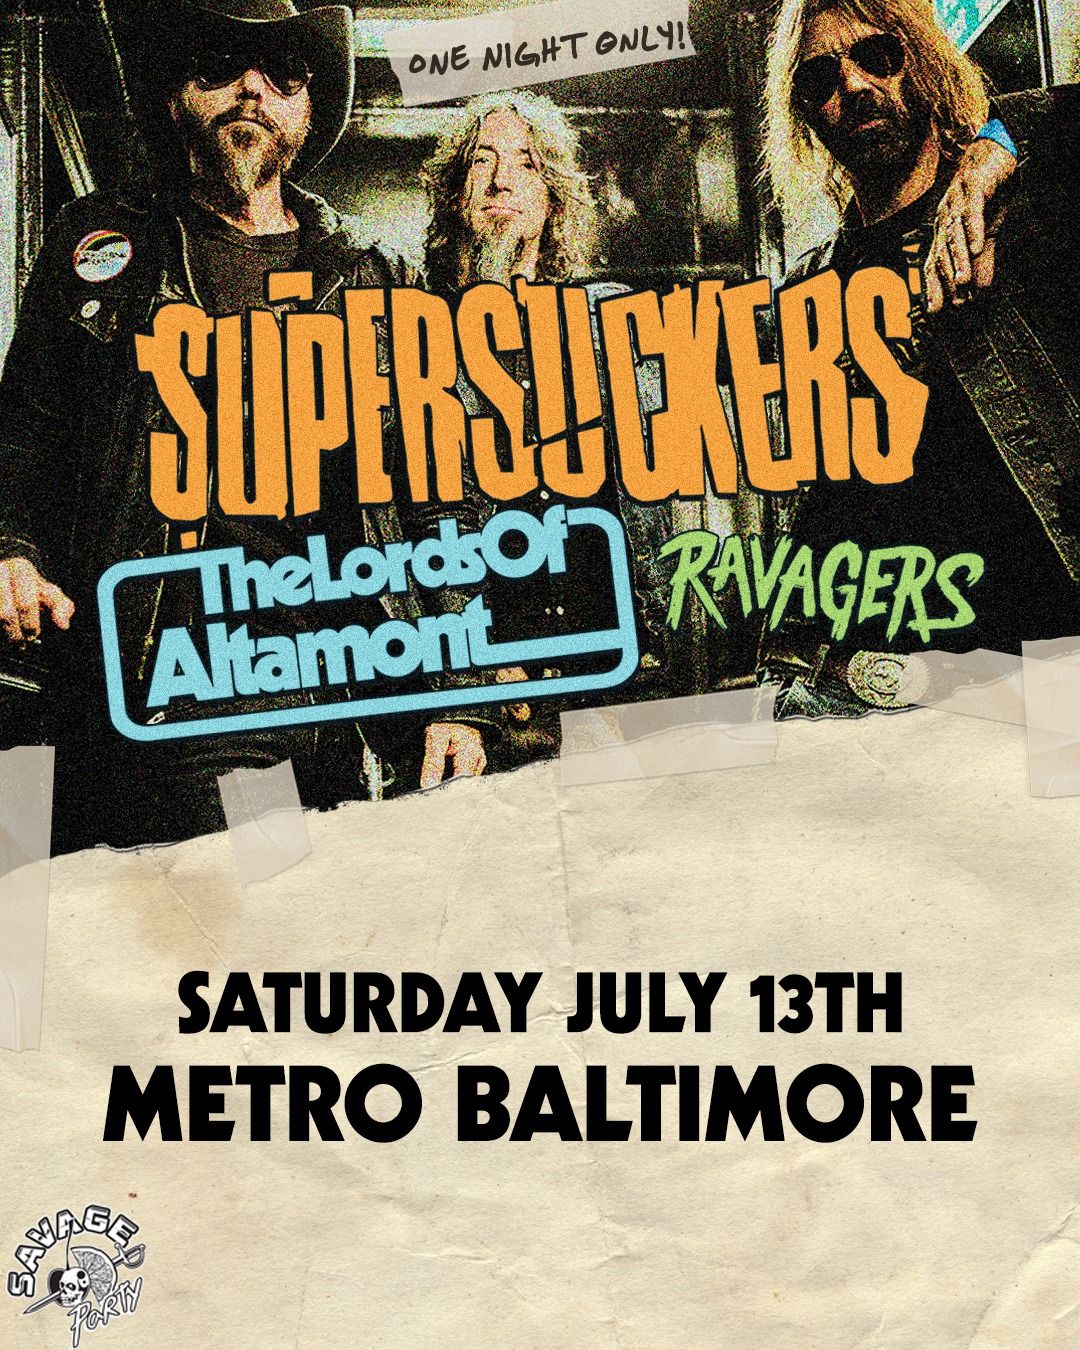 SUPERSUCKERS w\/ The Lords of Altamont and Ravagers @ Metro Baltimore 